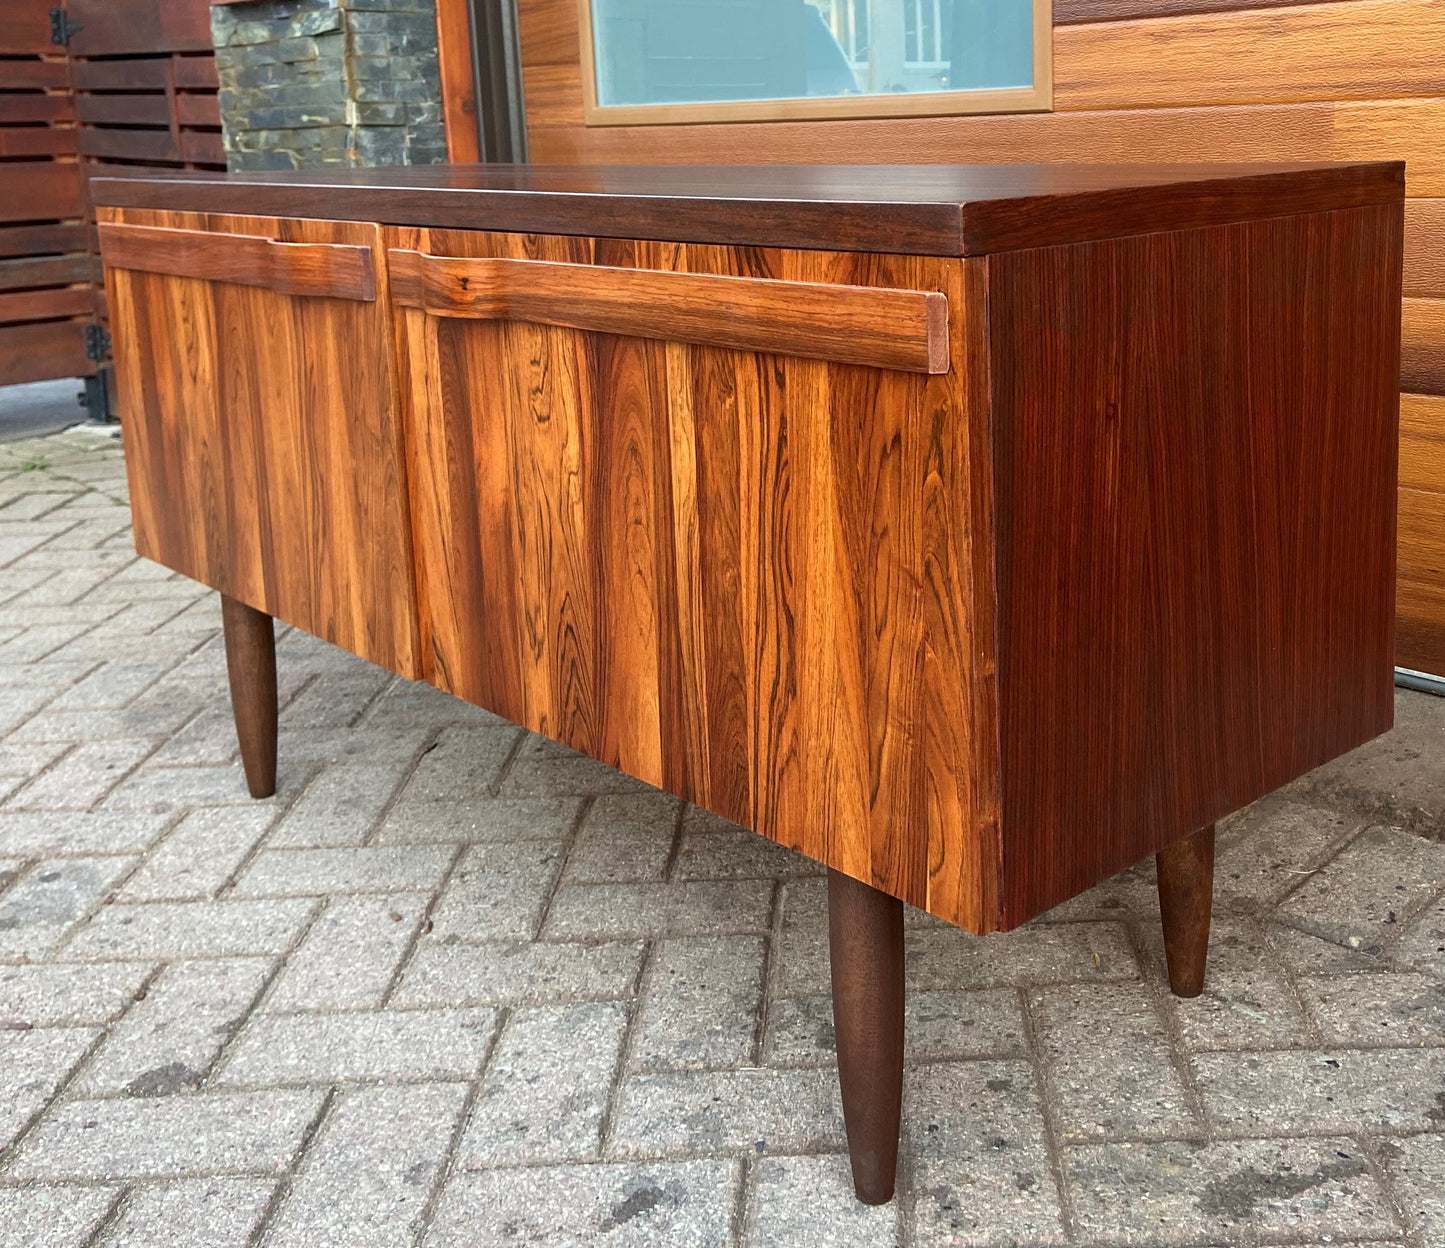 REFINISHED Swedish Mid Century Modern Rosewood Credenza by Troeds 51"